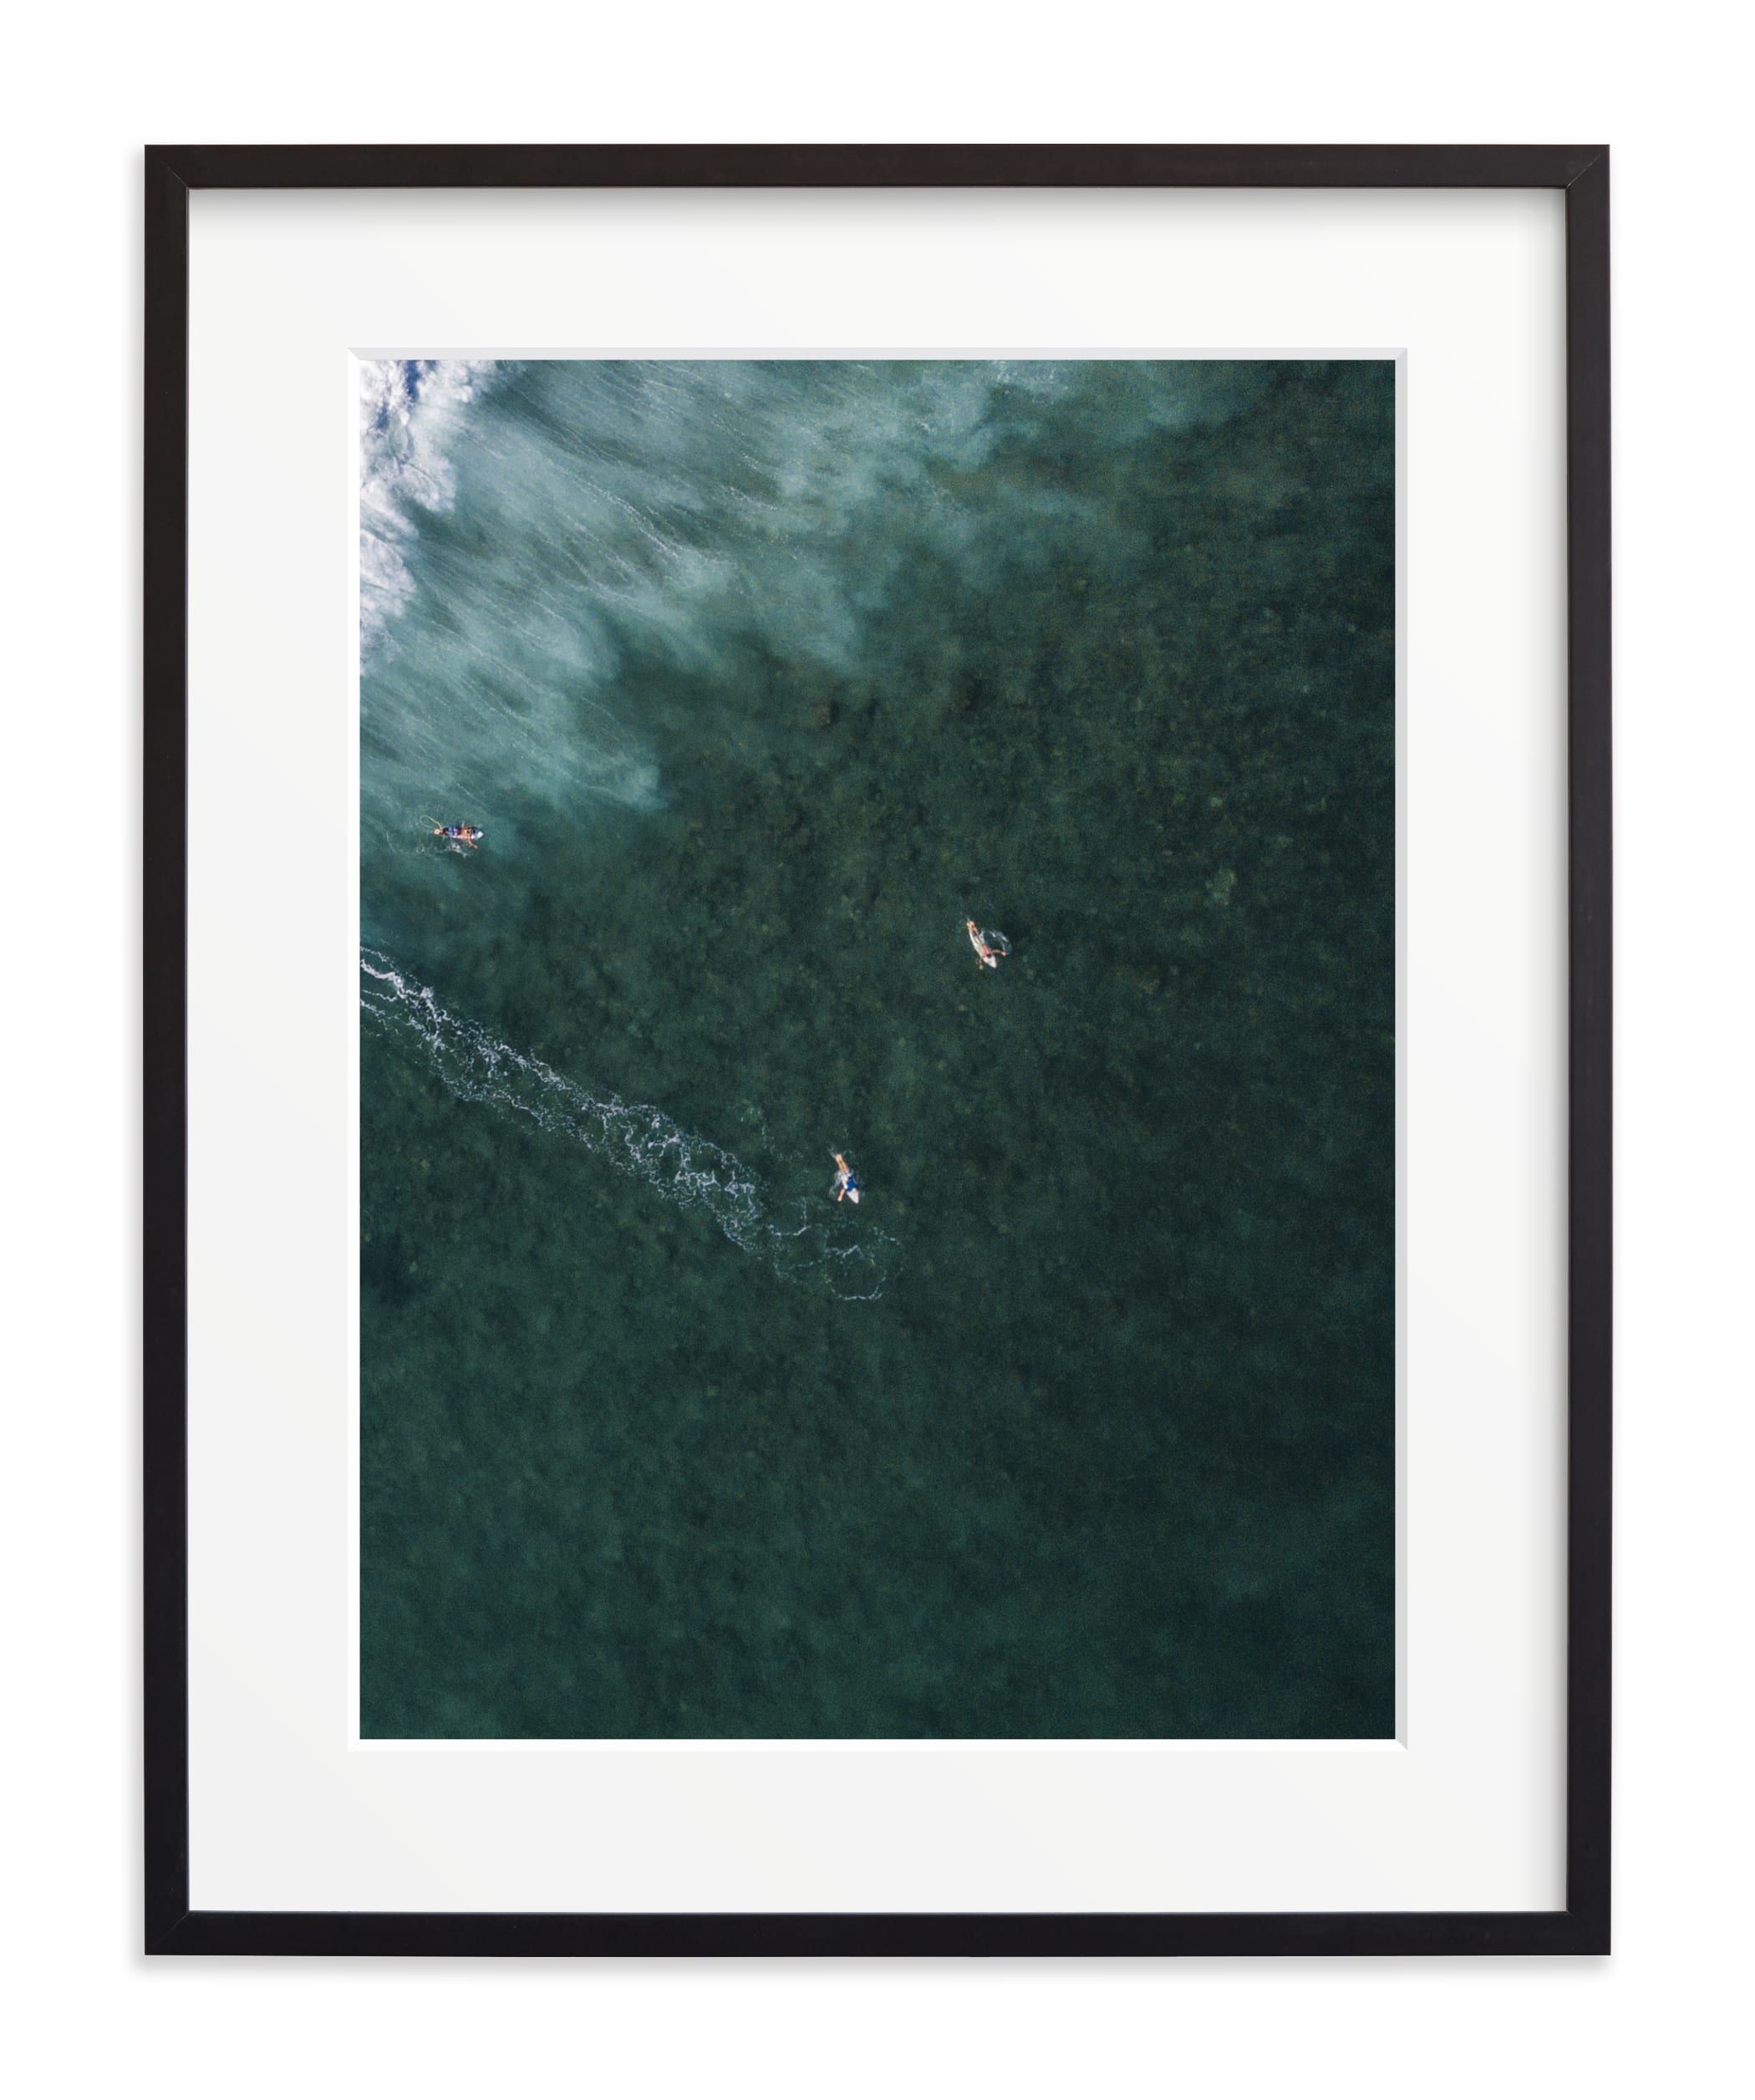 "Ride II" - Photography Limited Edition Art Print by Shari Margolin. | Minted